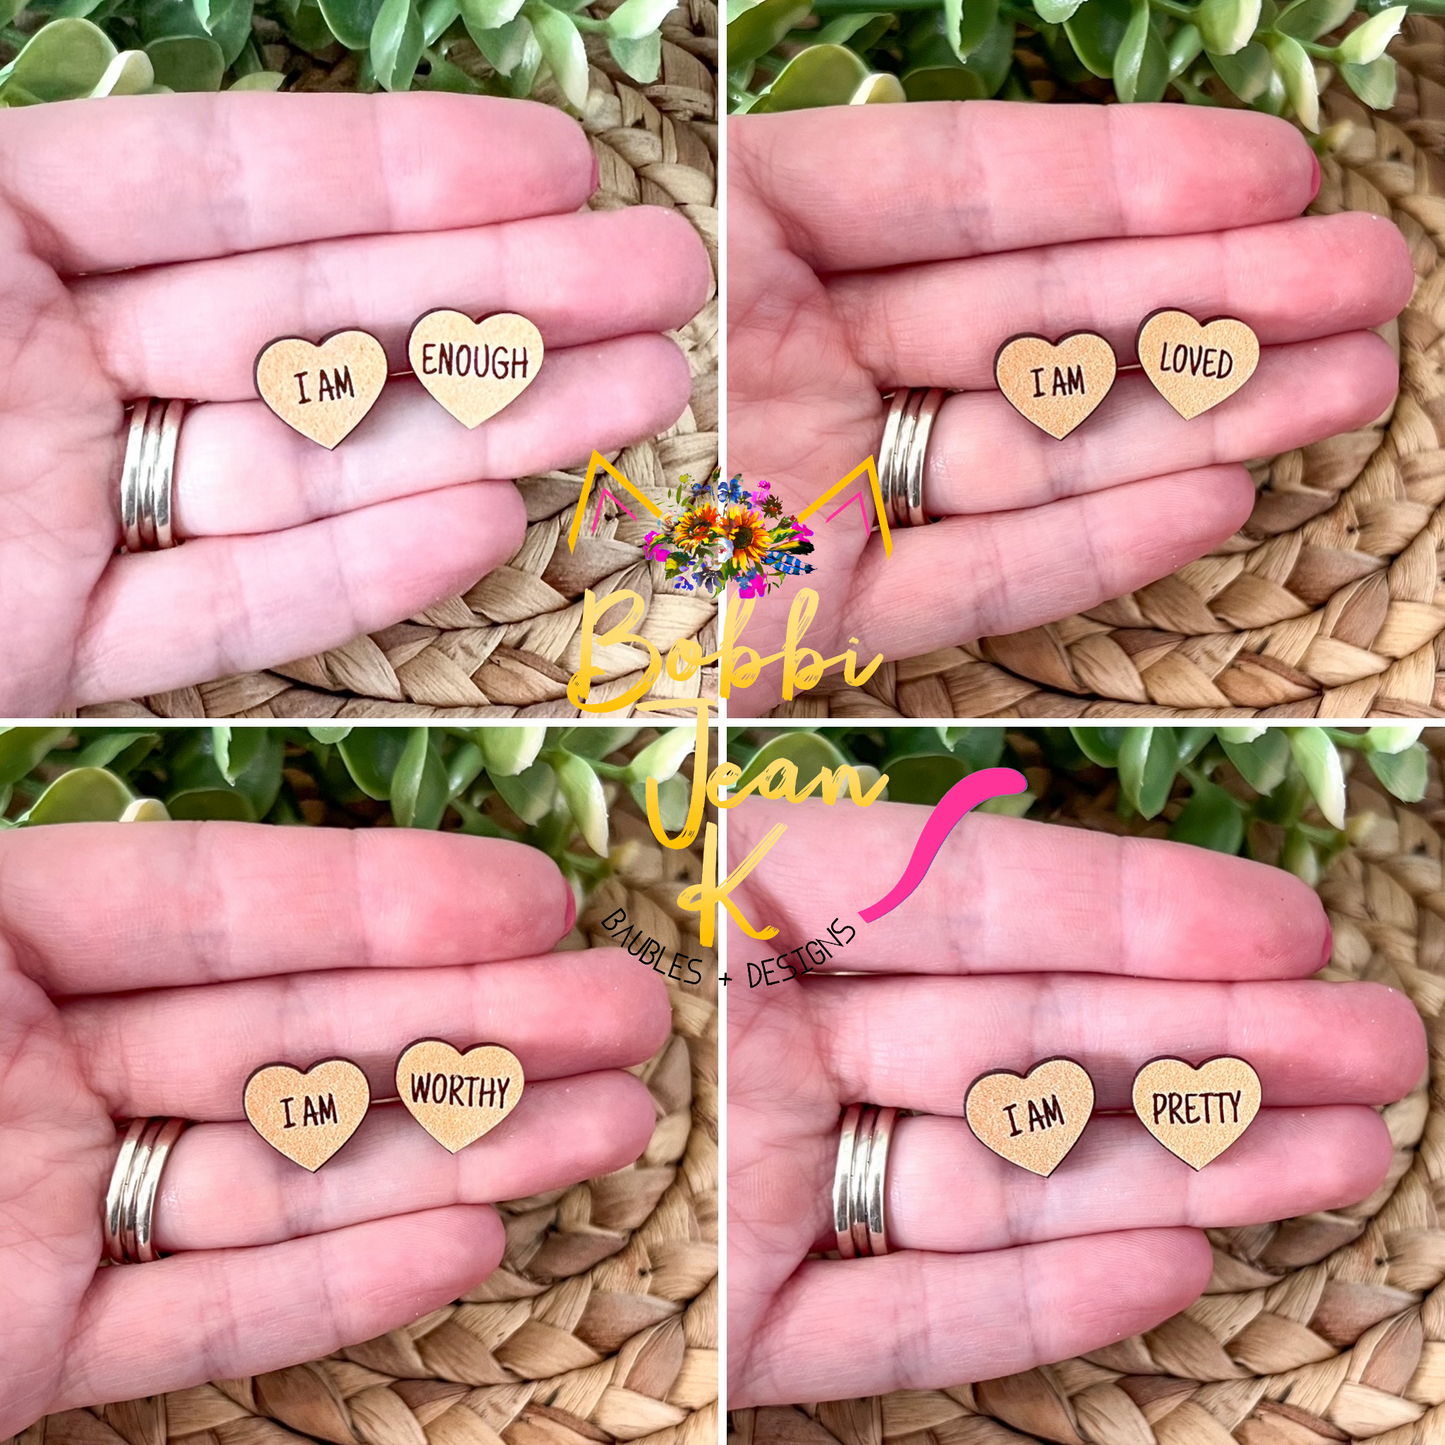 SALE: Peach Wood Affirmation Heart Studs: 4 Pairs in One Set - ONLY ONE LEFT